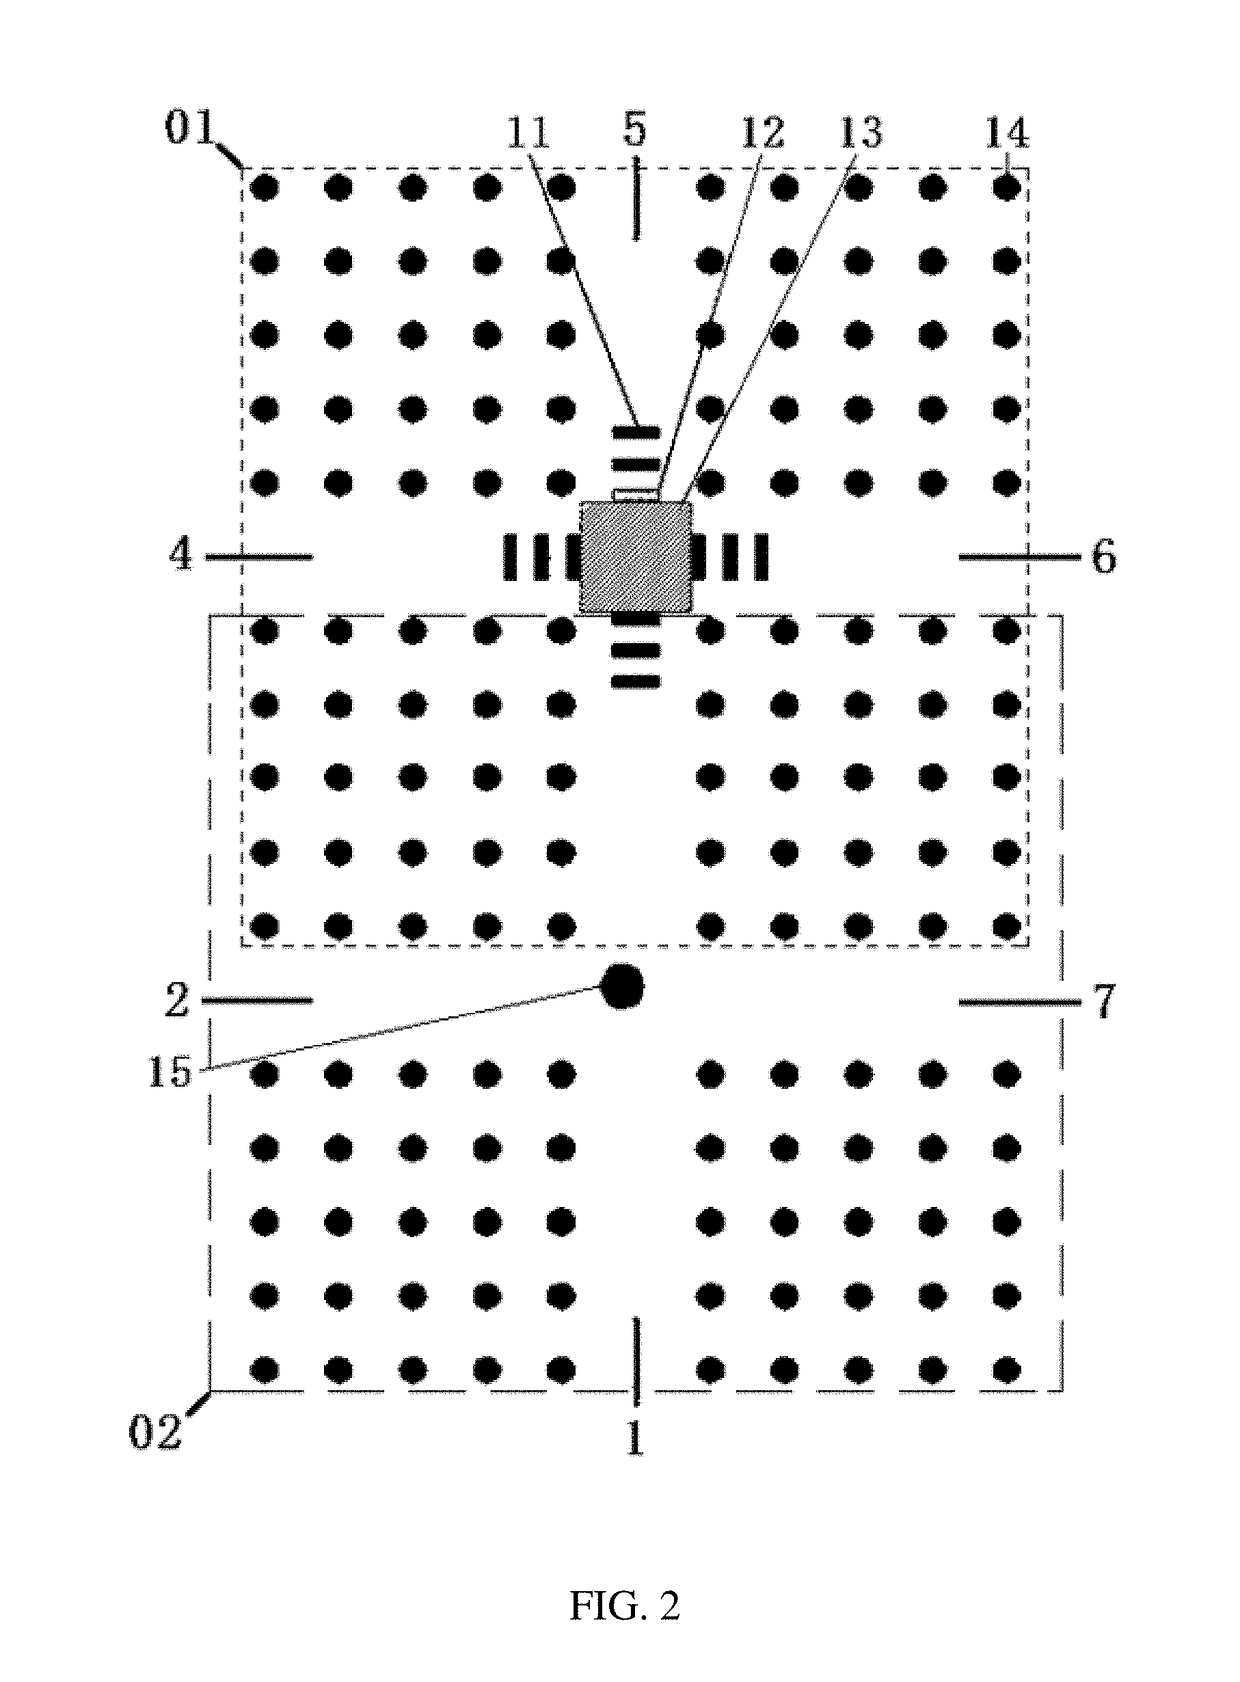 High-contrast photonic crystal "or," "not" and "xor" logic gate